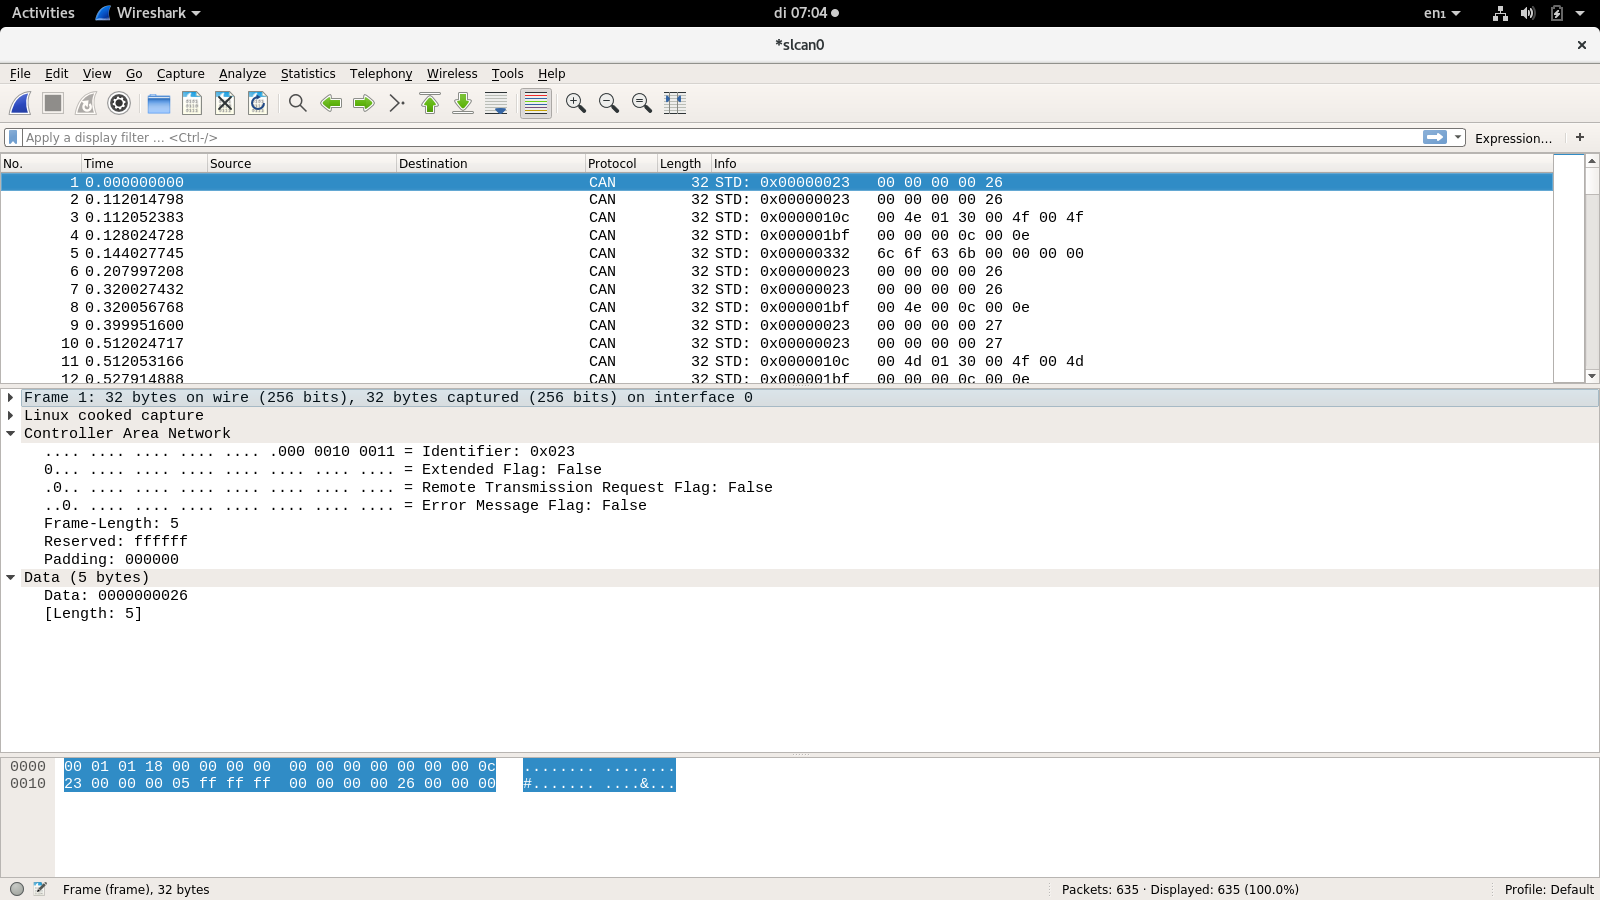 _images/wireshark.png